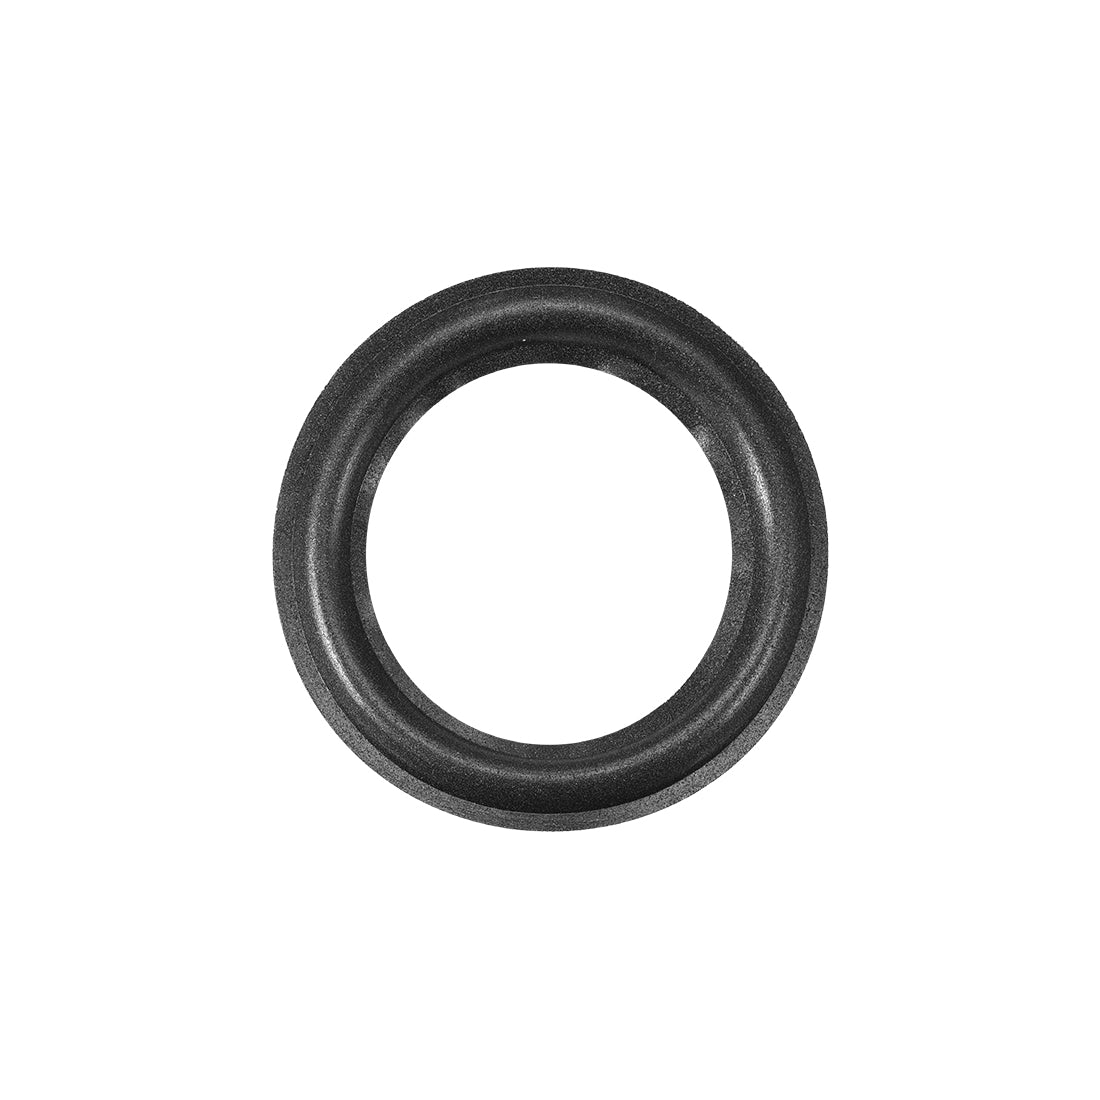 uxcell Uxcell 3"  3 inches Speaker Foam Edge Surround Rings Replacement Parts for Speaker Repair or DIY